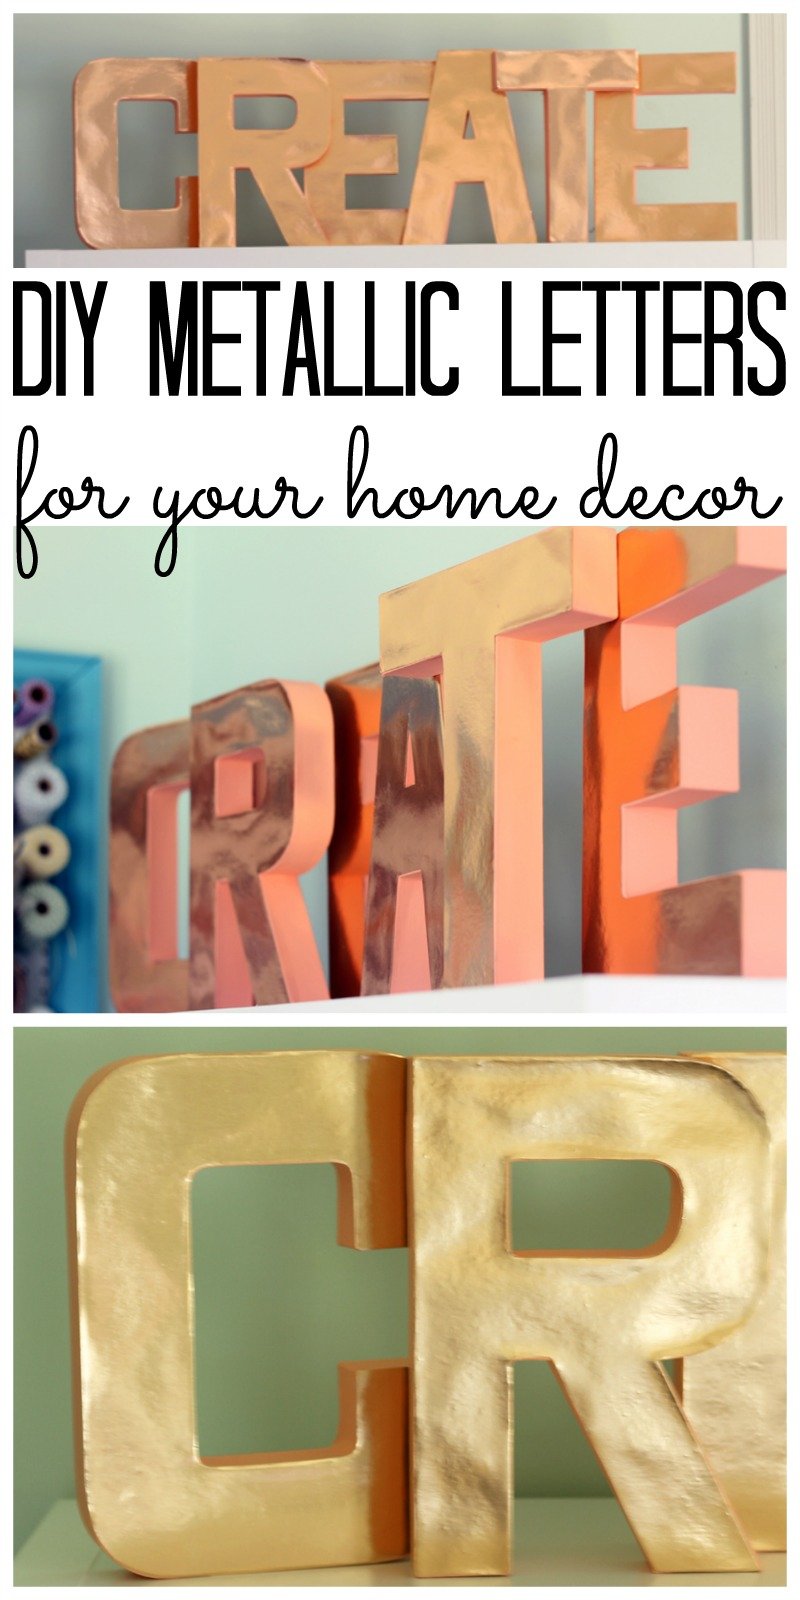 Make some metallic paper crafts with these DIY metallic letters. Yes you can buy paper that has a metallic sheen and cover monogram letters for your home!